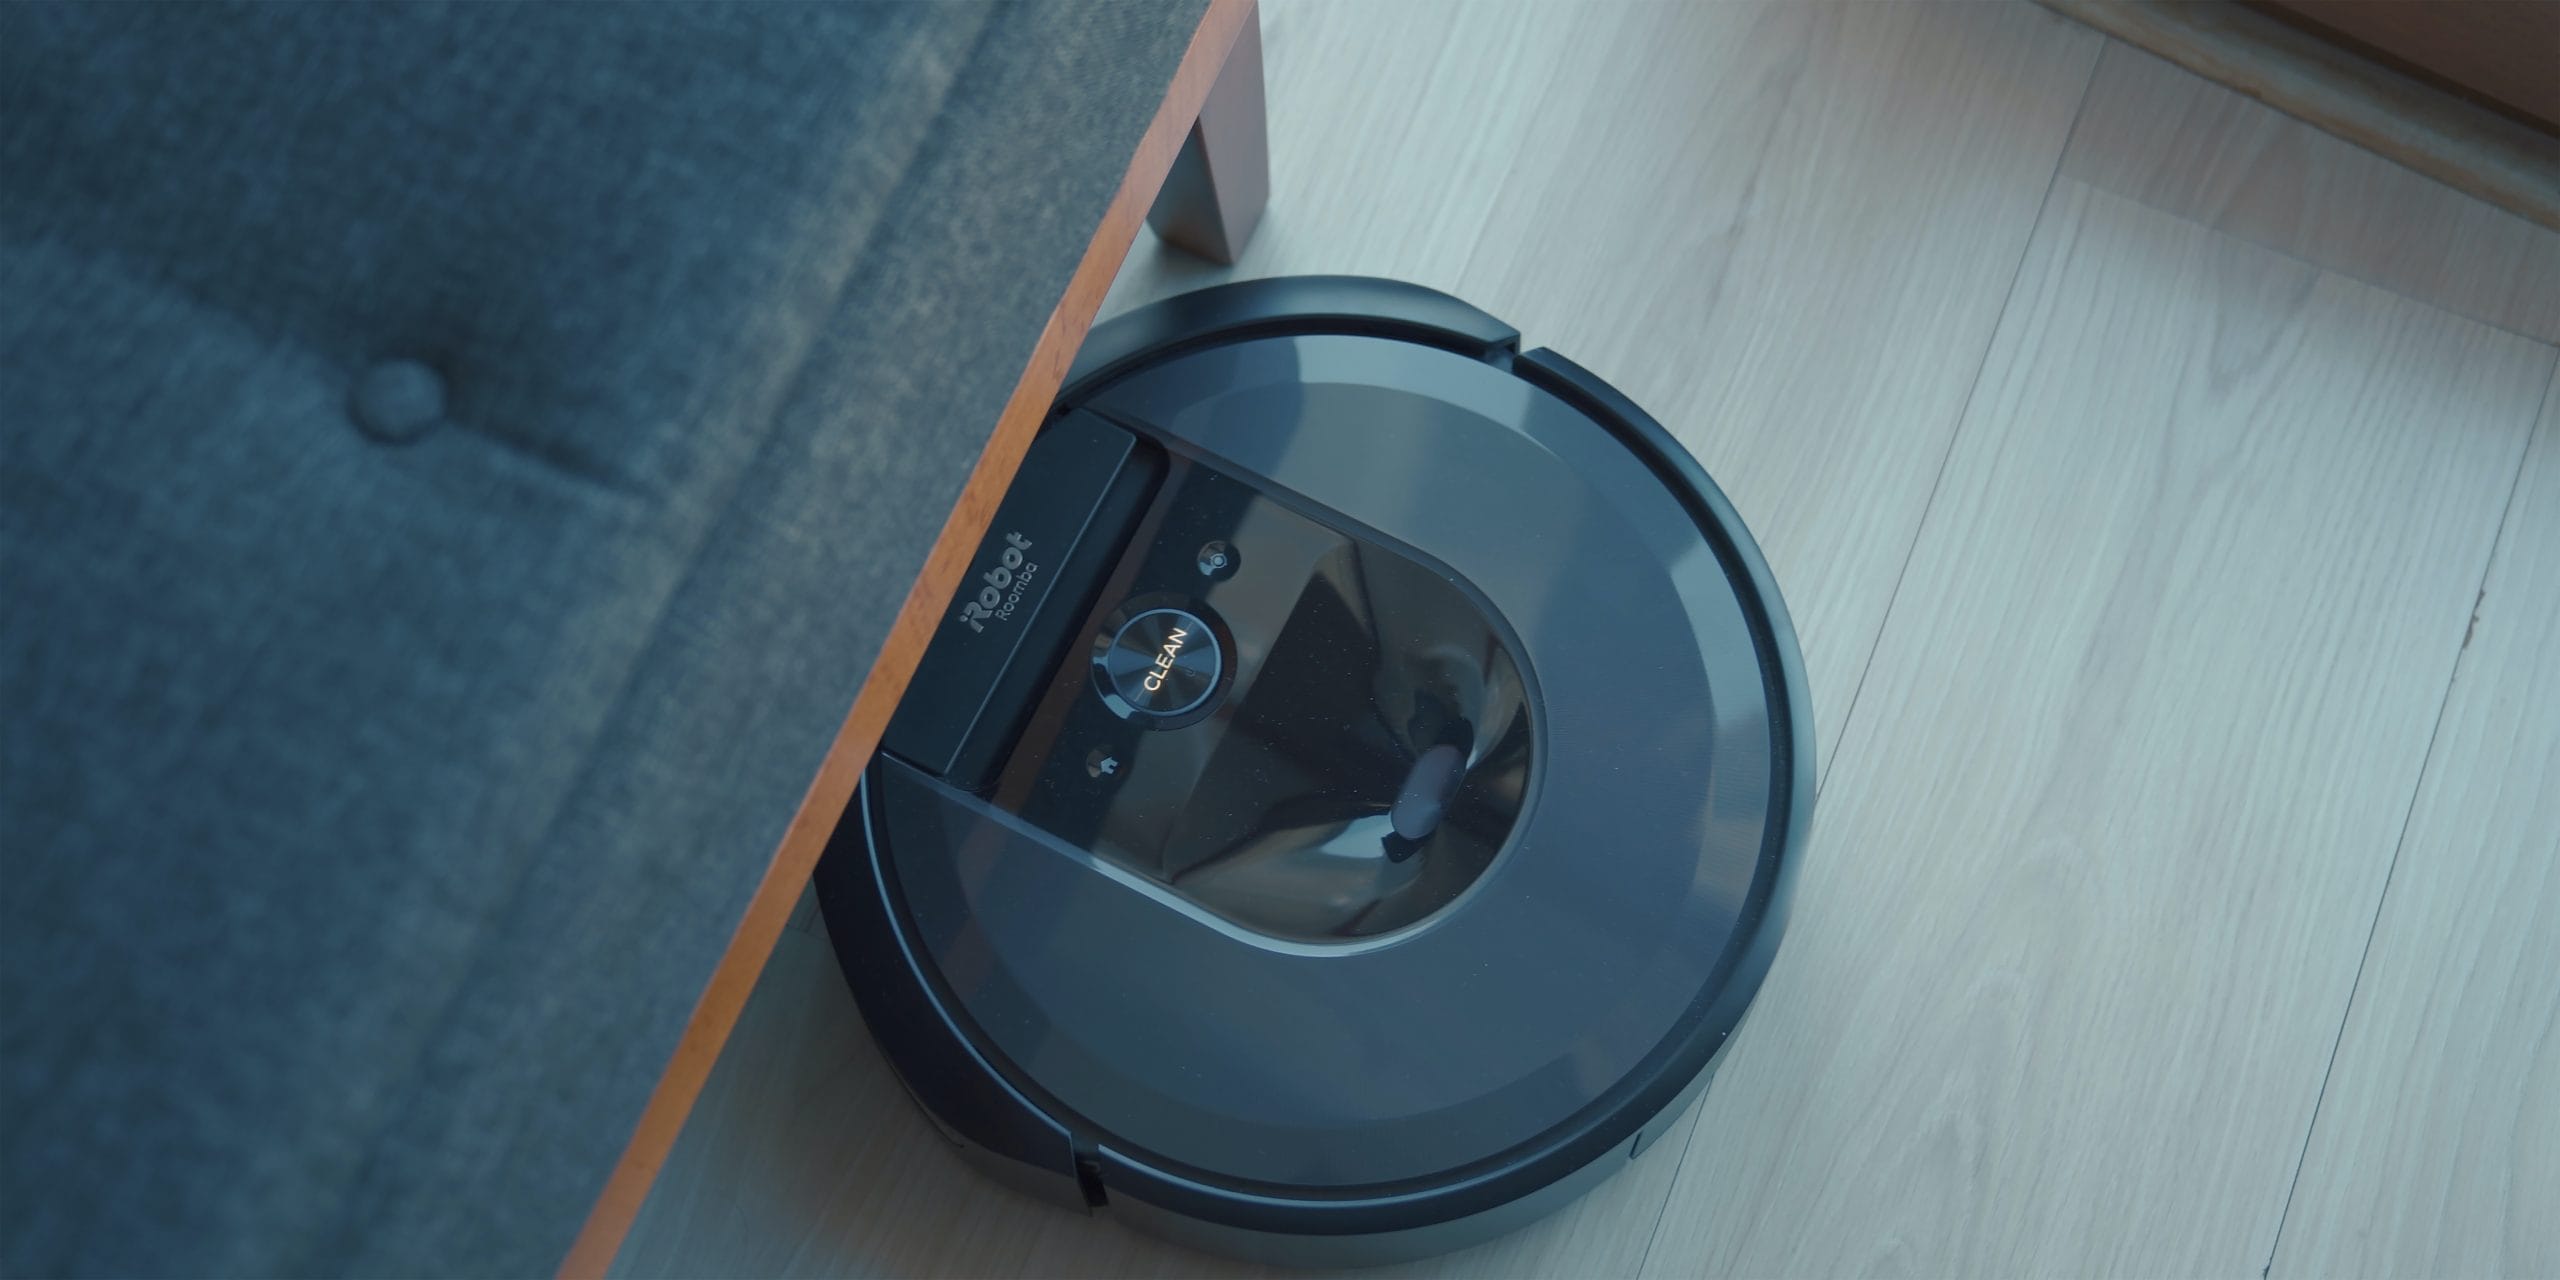 10 Effective Ways on How To Prevent Roomba From Getting Stuck